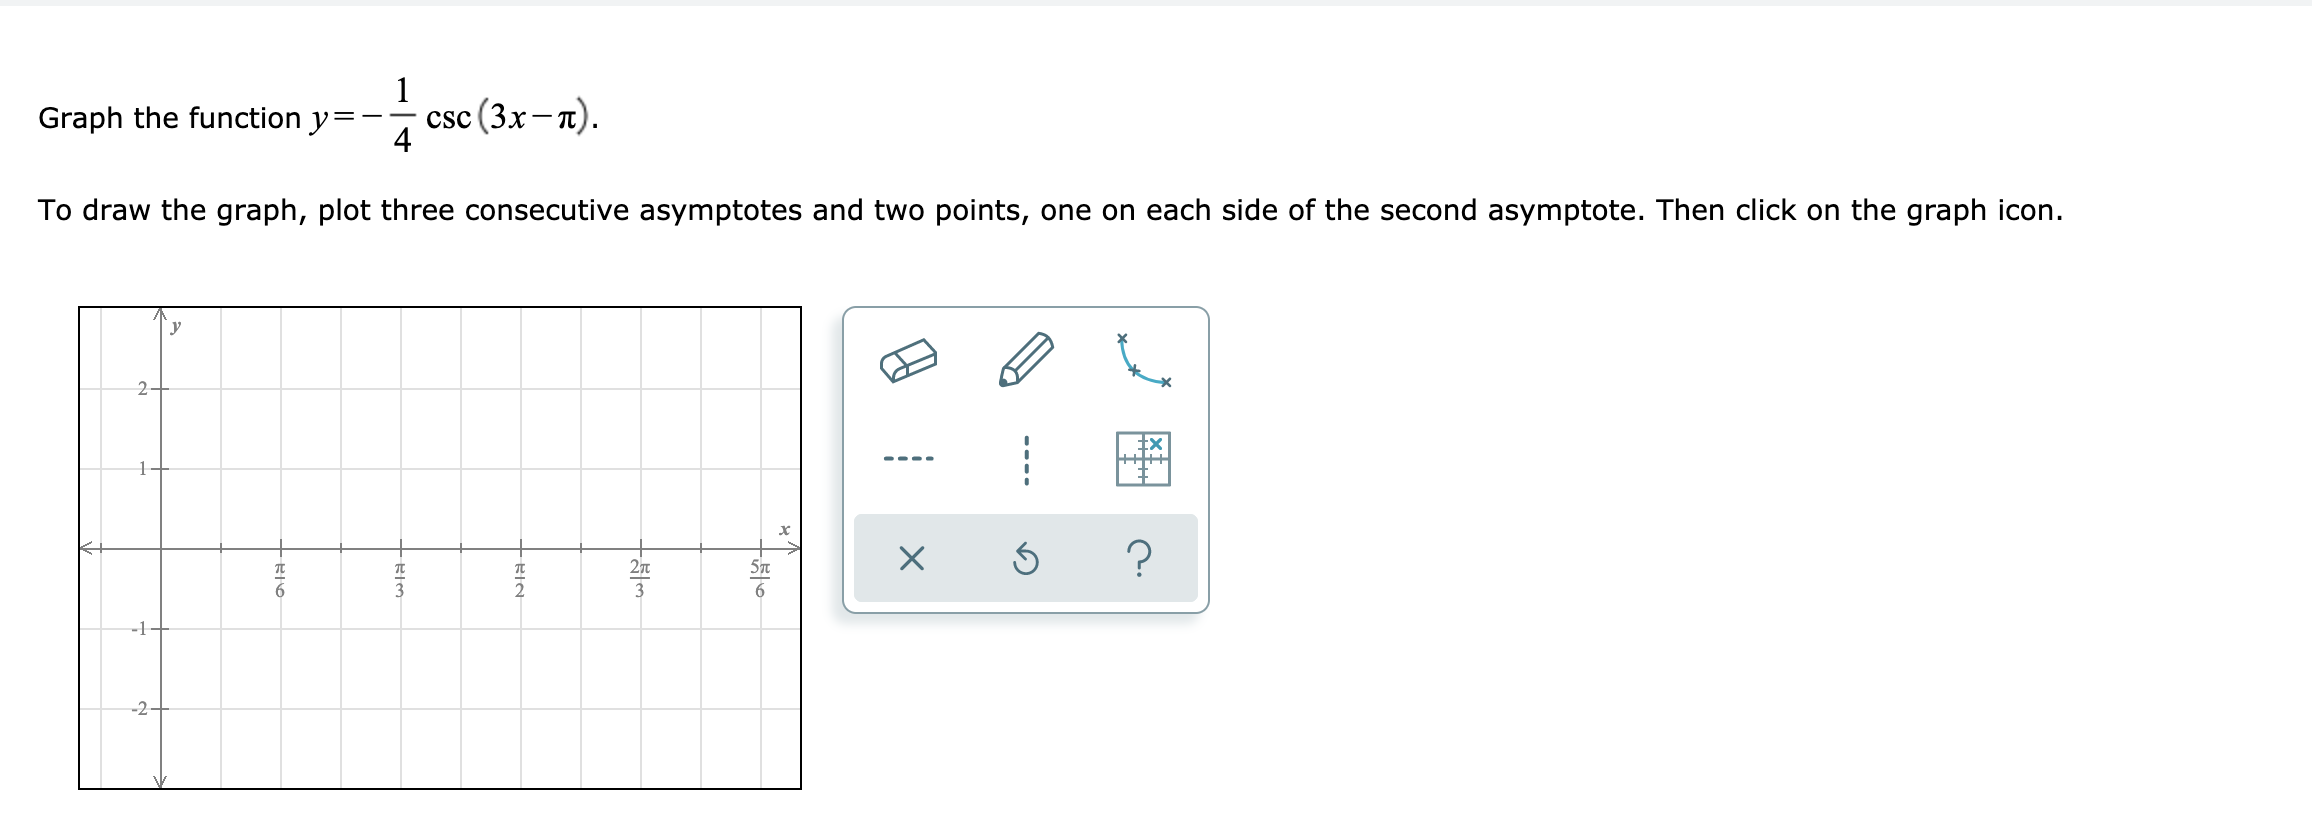 Graph the function y=
csc (3x — п).
4
To draw the graph, plot three consecutive asymptotes and two points, one on each side of the second asymptote. Then click on the graph icon.
У
-1
-2
हl
BIO
